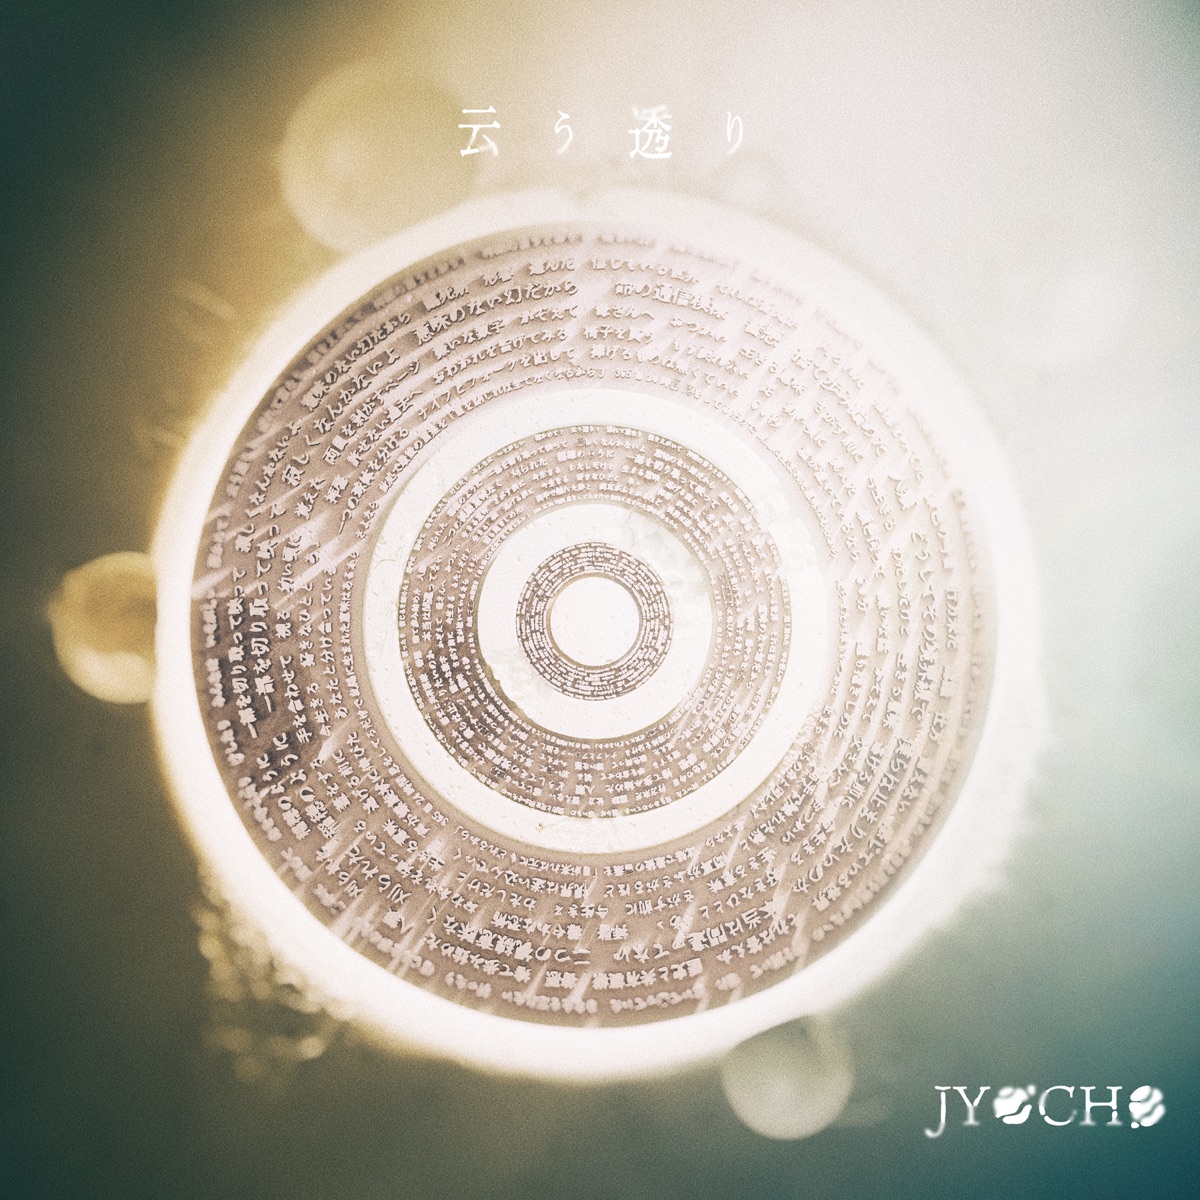 Cover art for『JYOCHO - 云う透り』from the release『As the Gods Say e.p